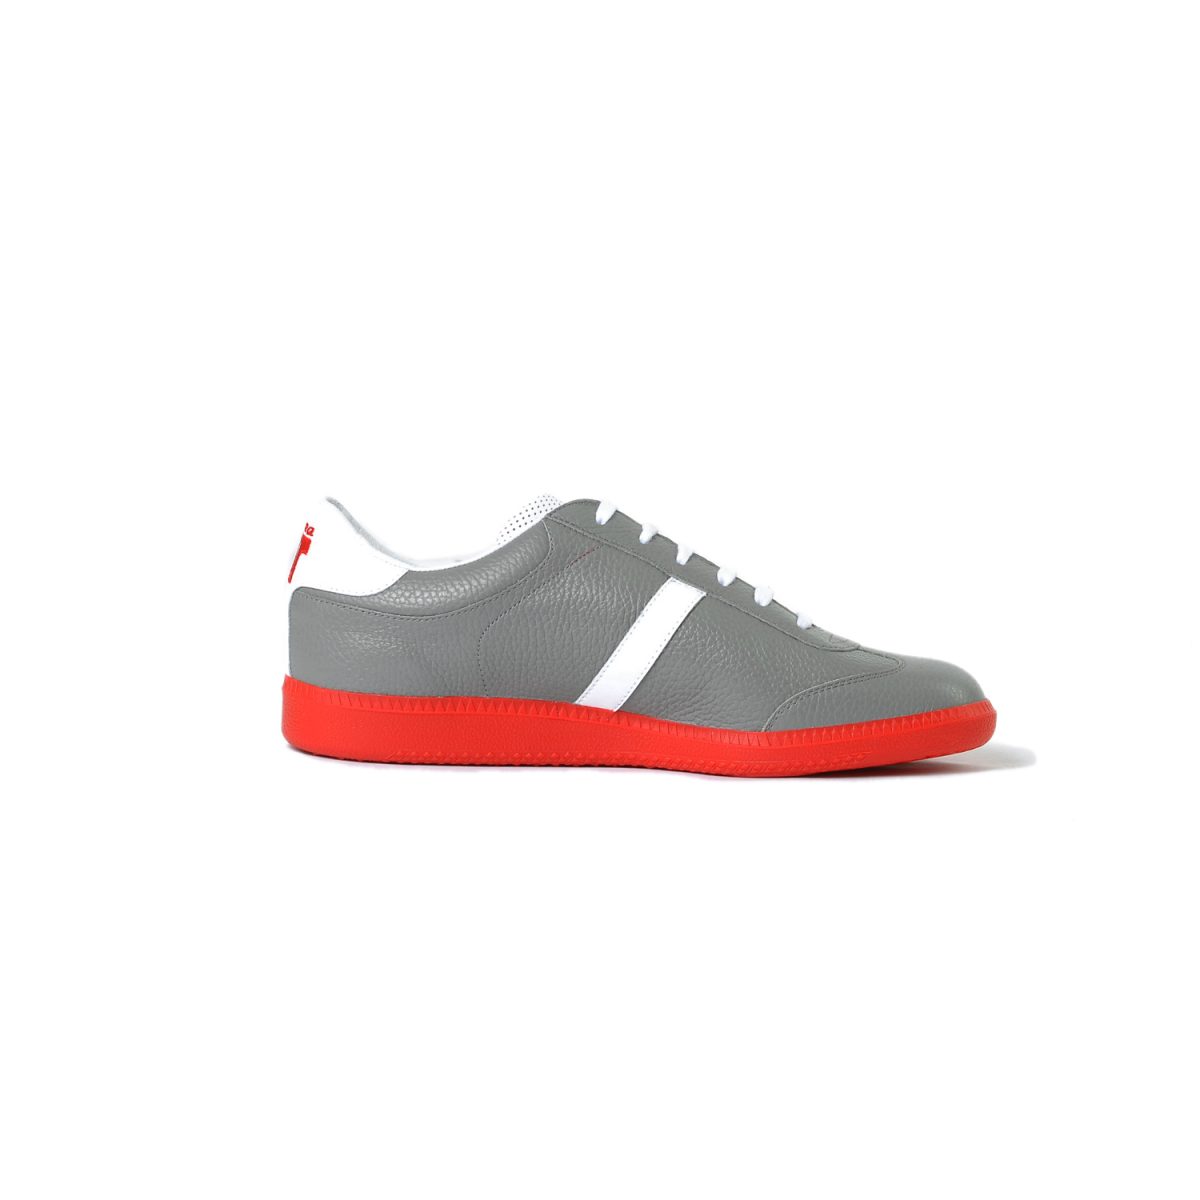 Tisza shoes - Compakt - Grey-white-red